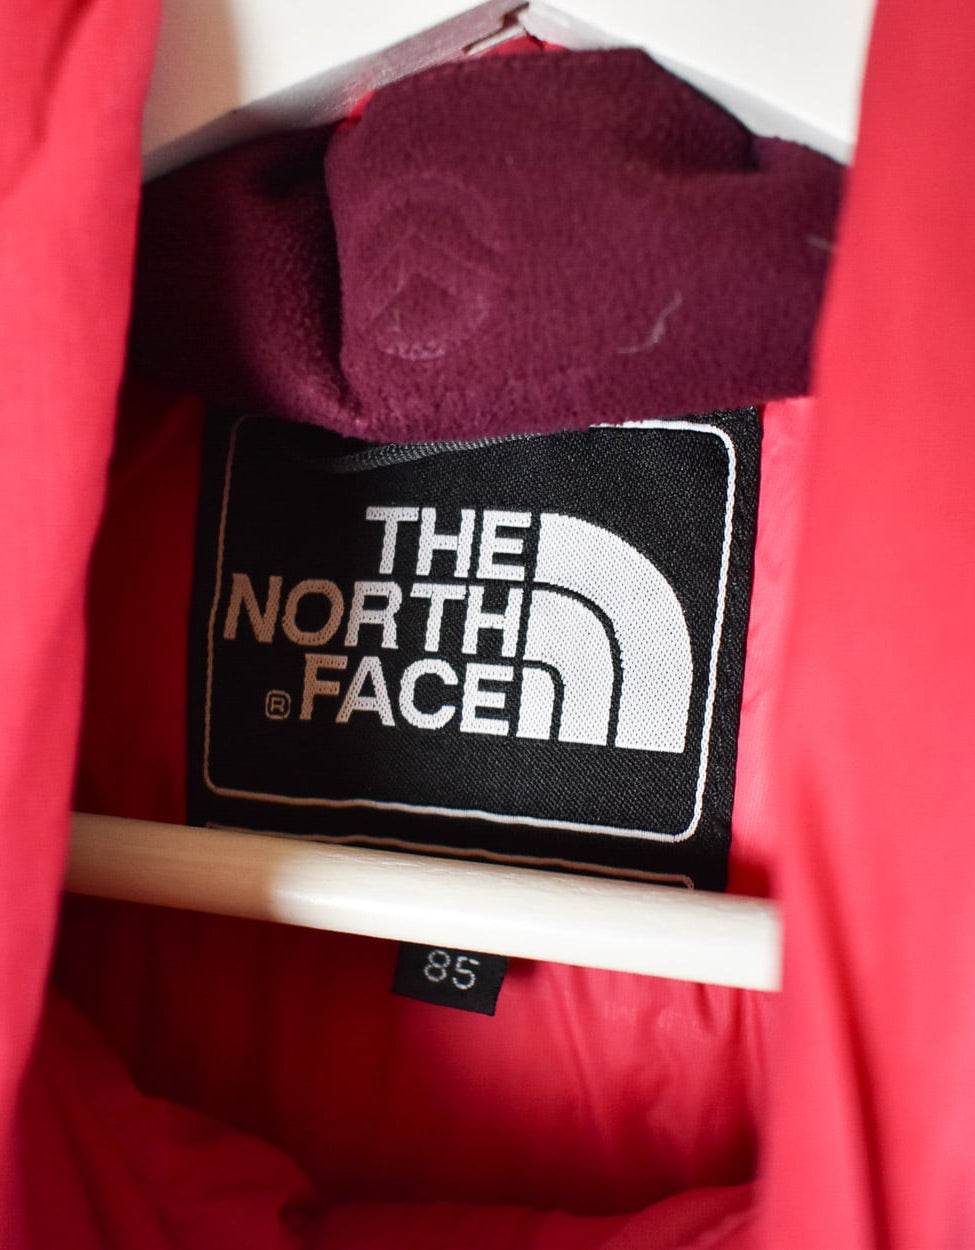 Pink The North Face Hooded Summit Series HyVent 800 Down Puffer Jacket - Medium Women's